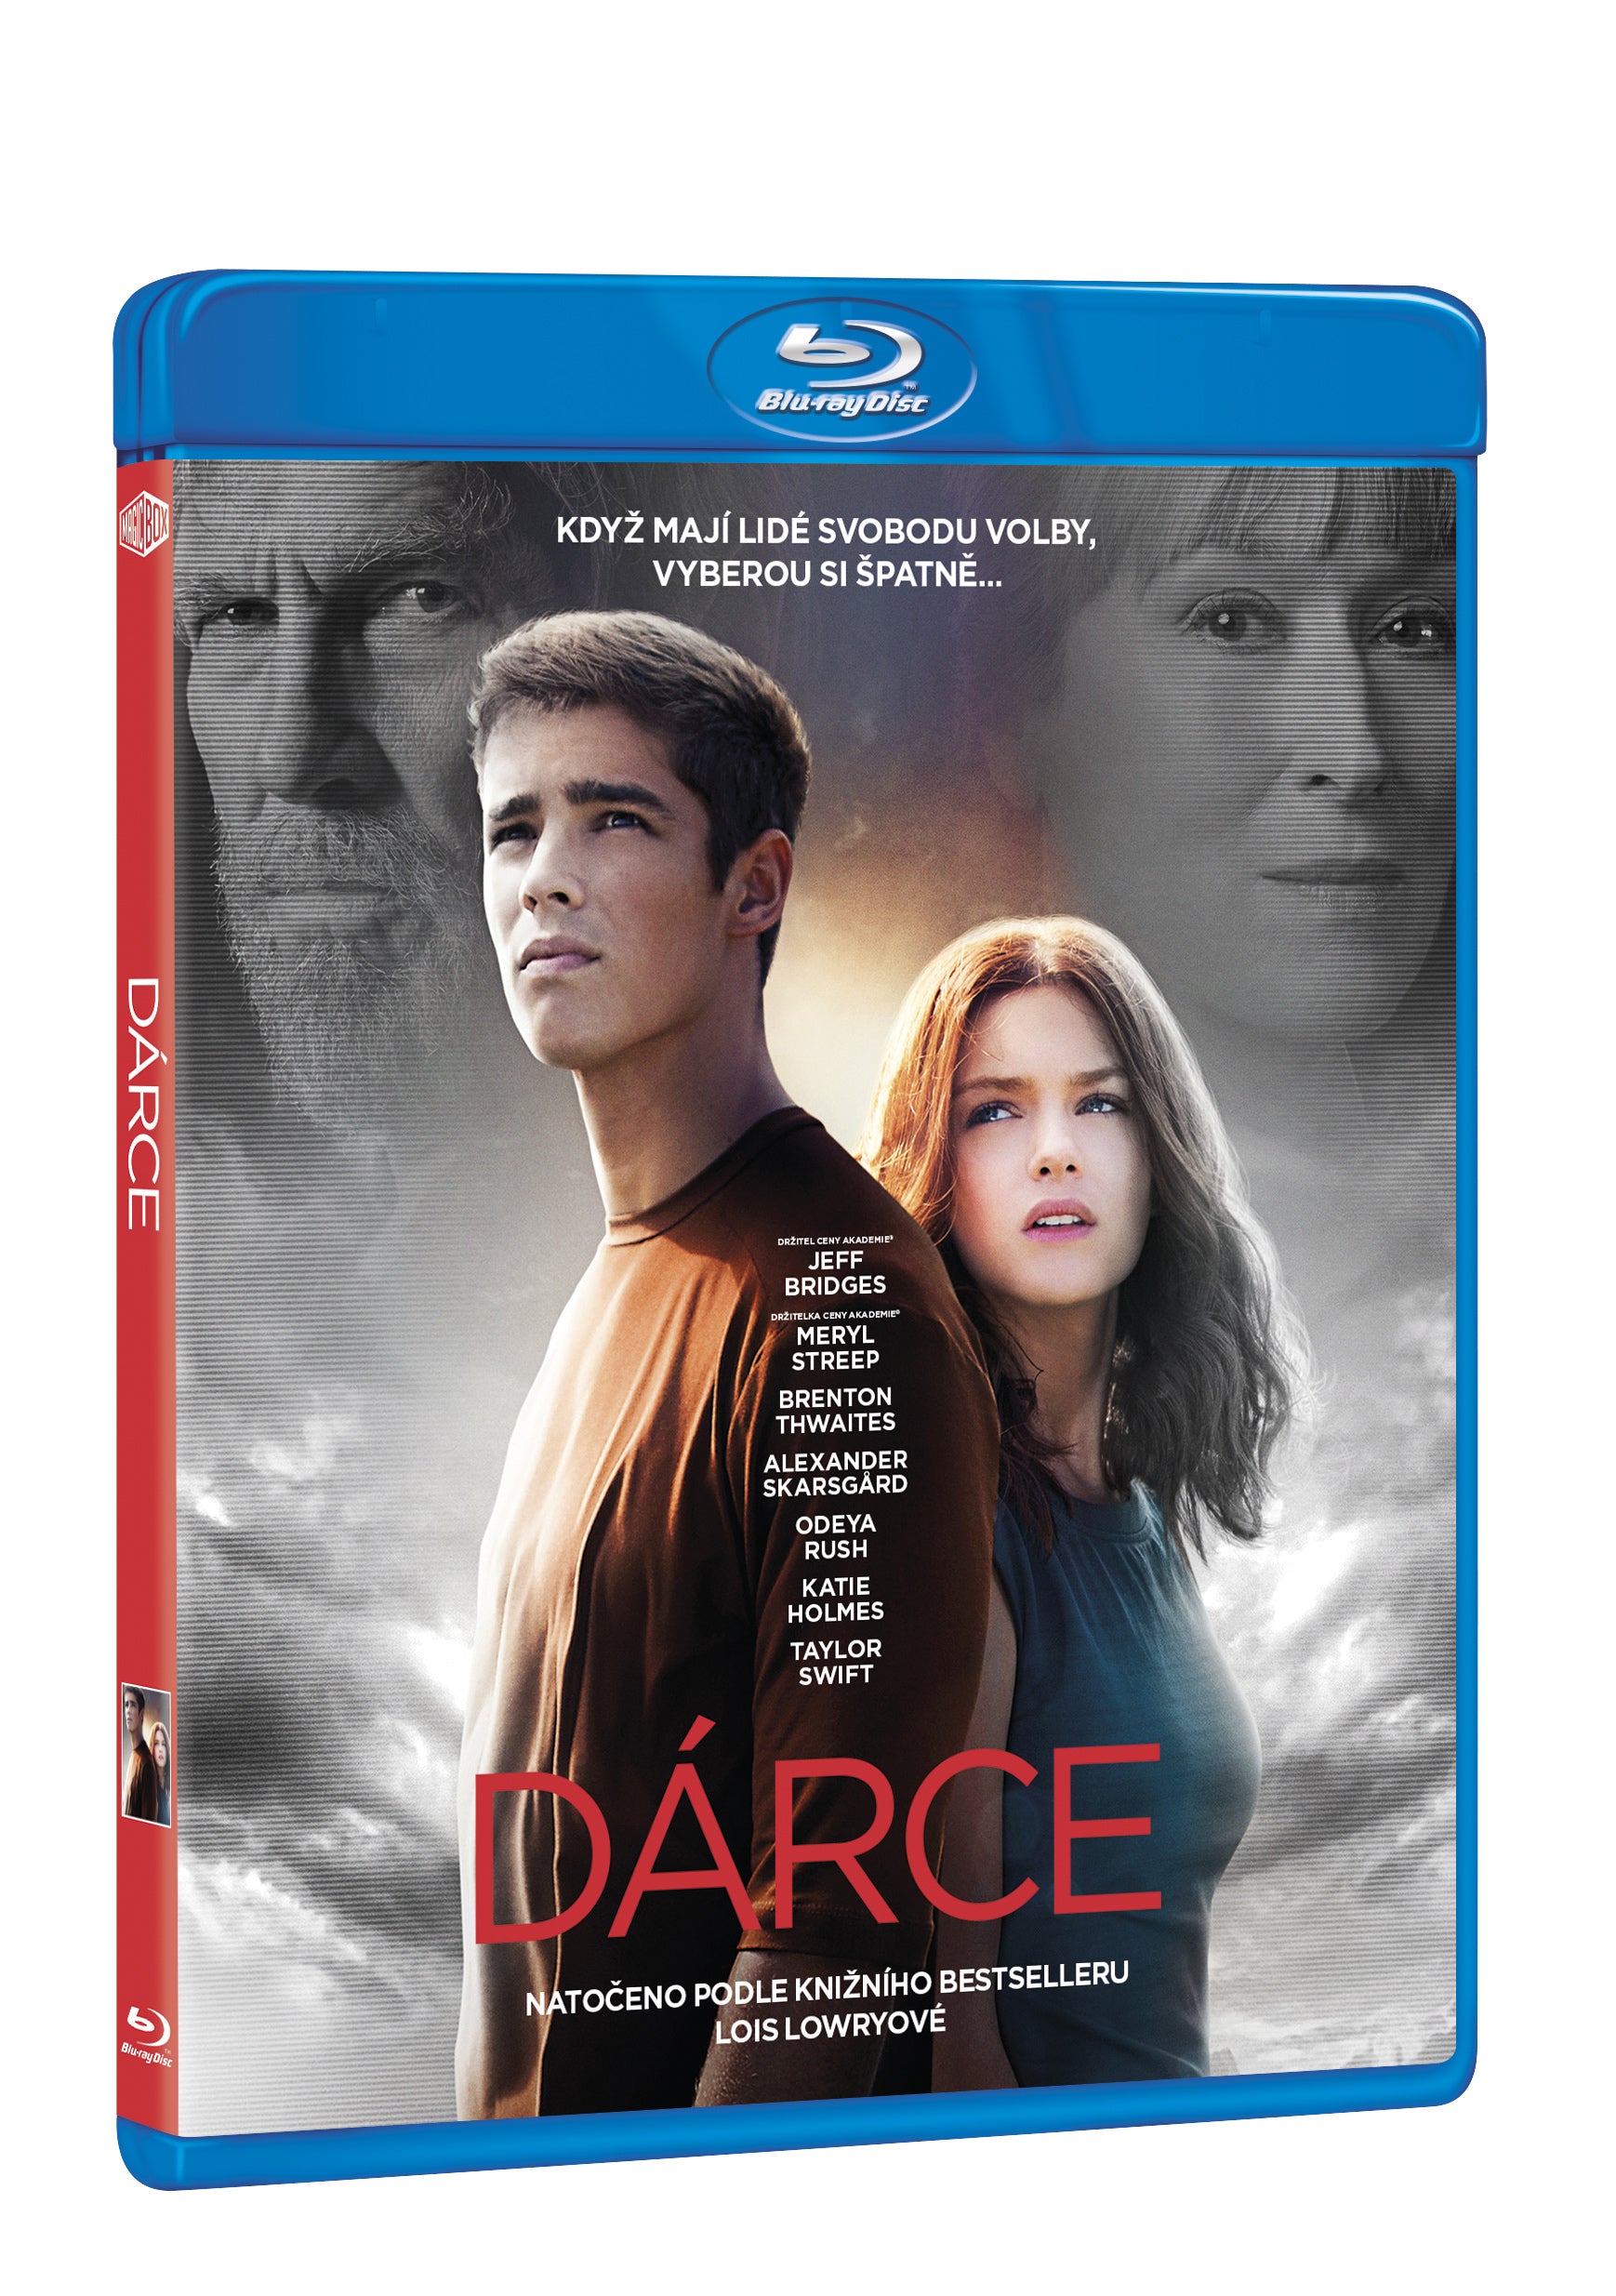 Darce BD / The Giver - Czech version